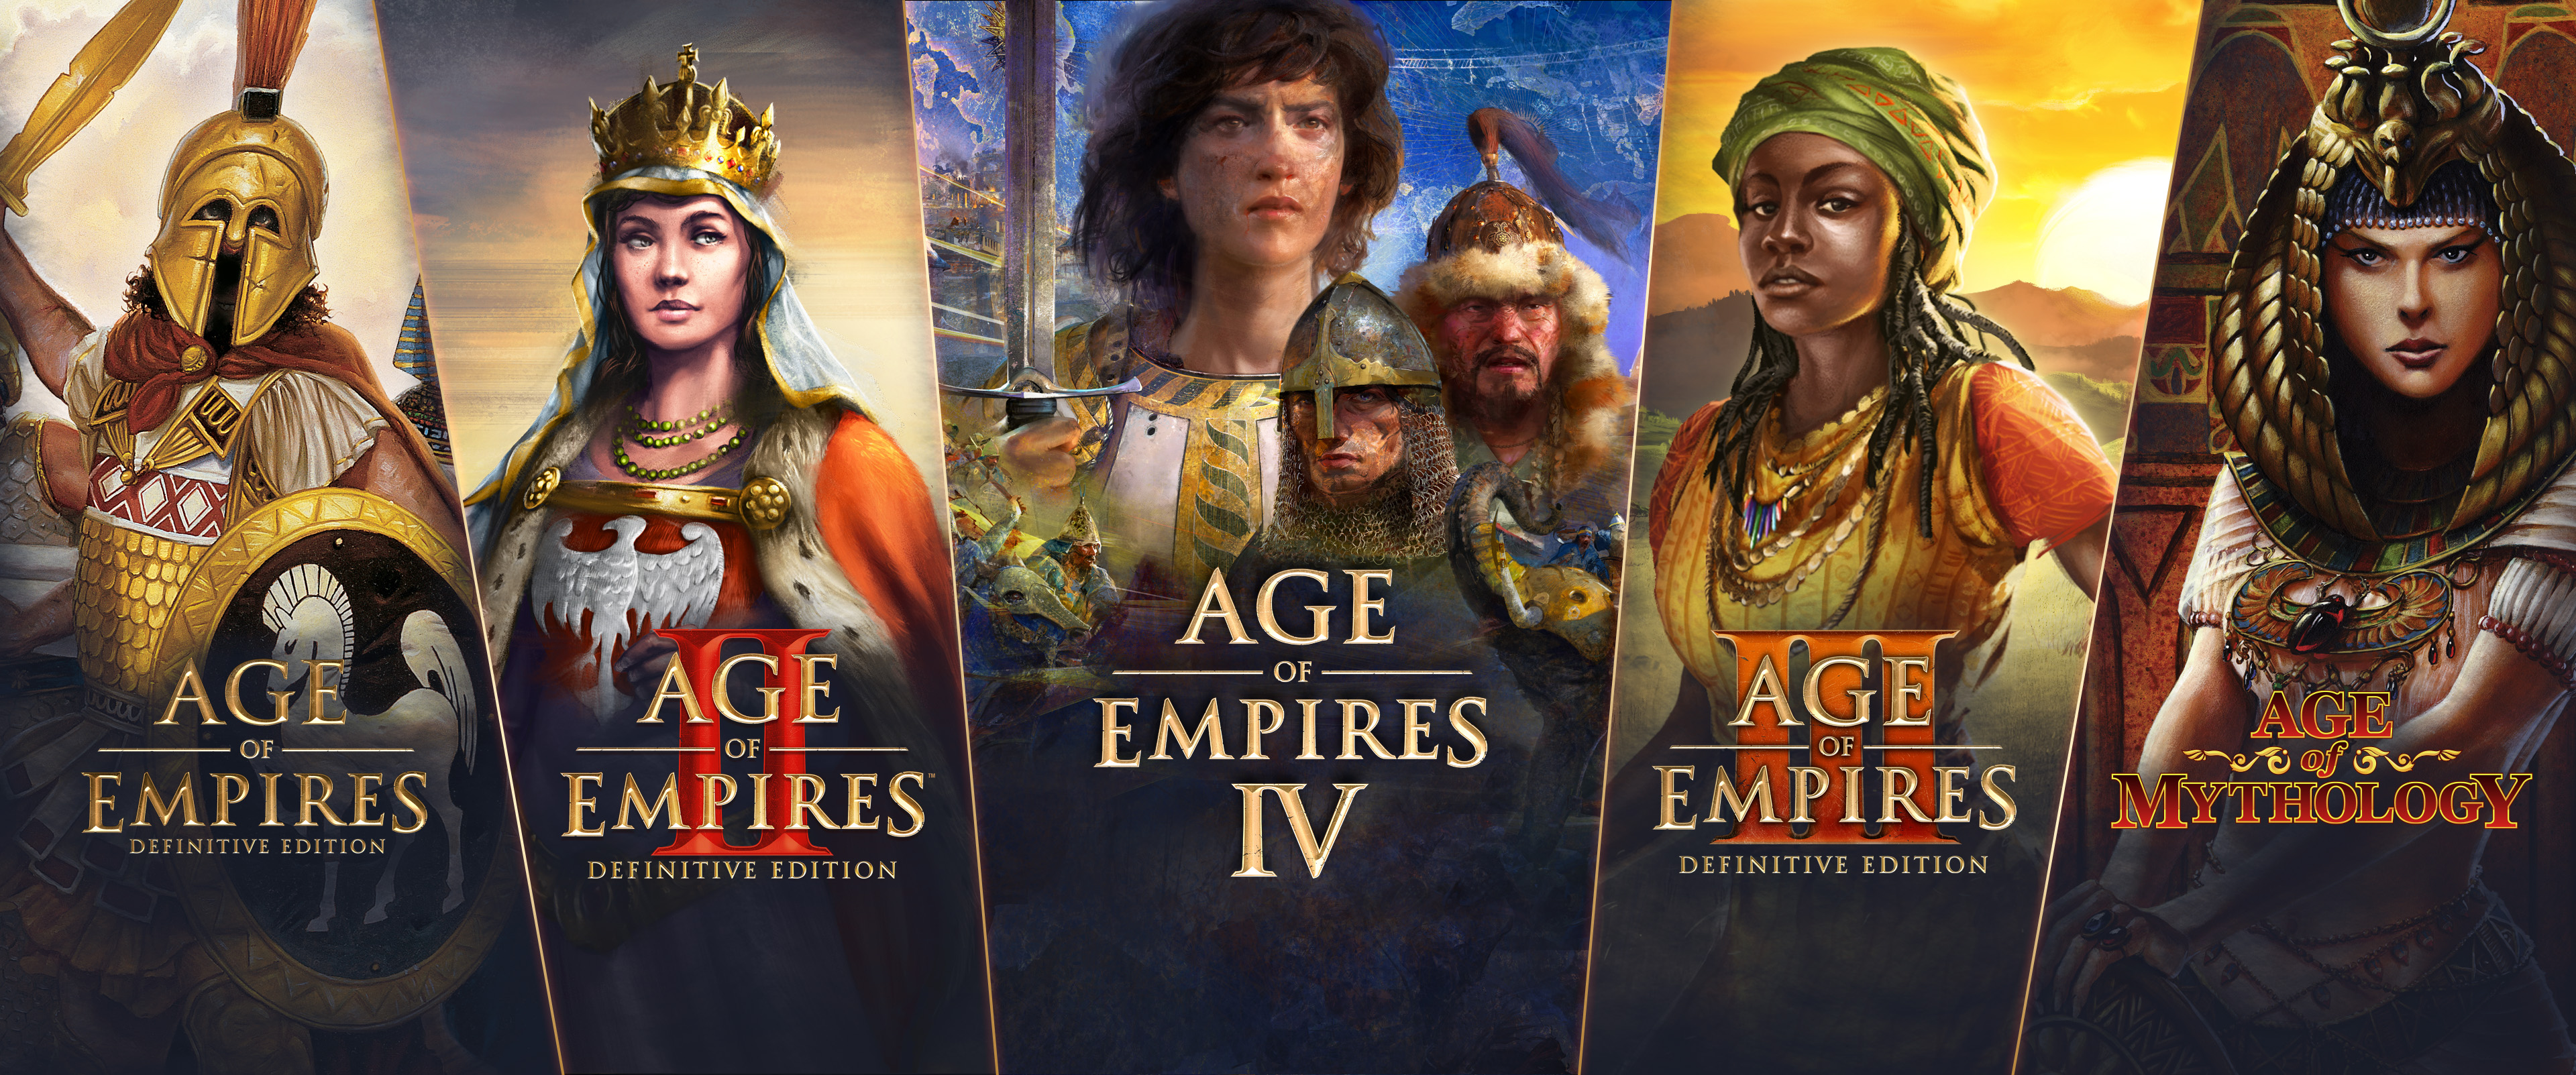 Welcome to Age of Empires - You are seeing this because your browser does not support html5 video